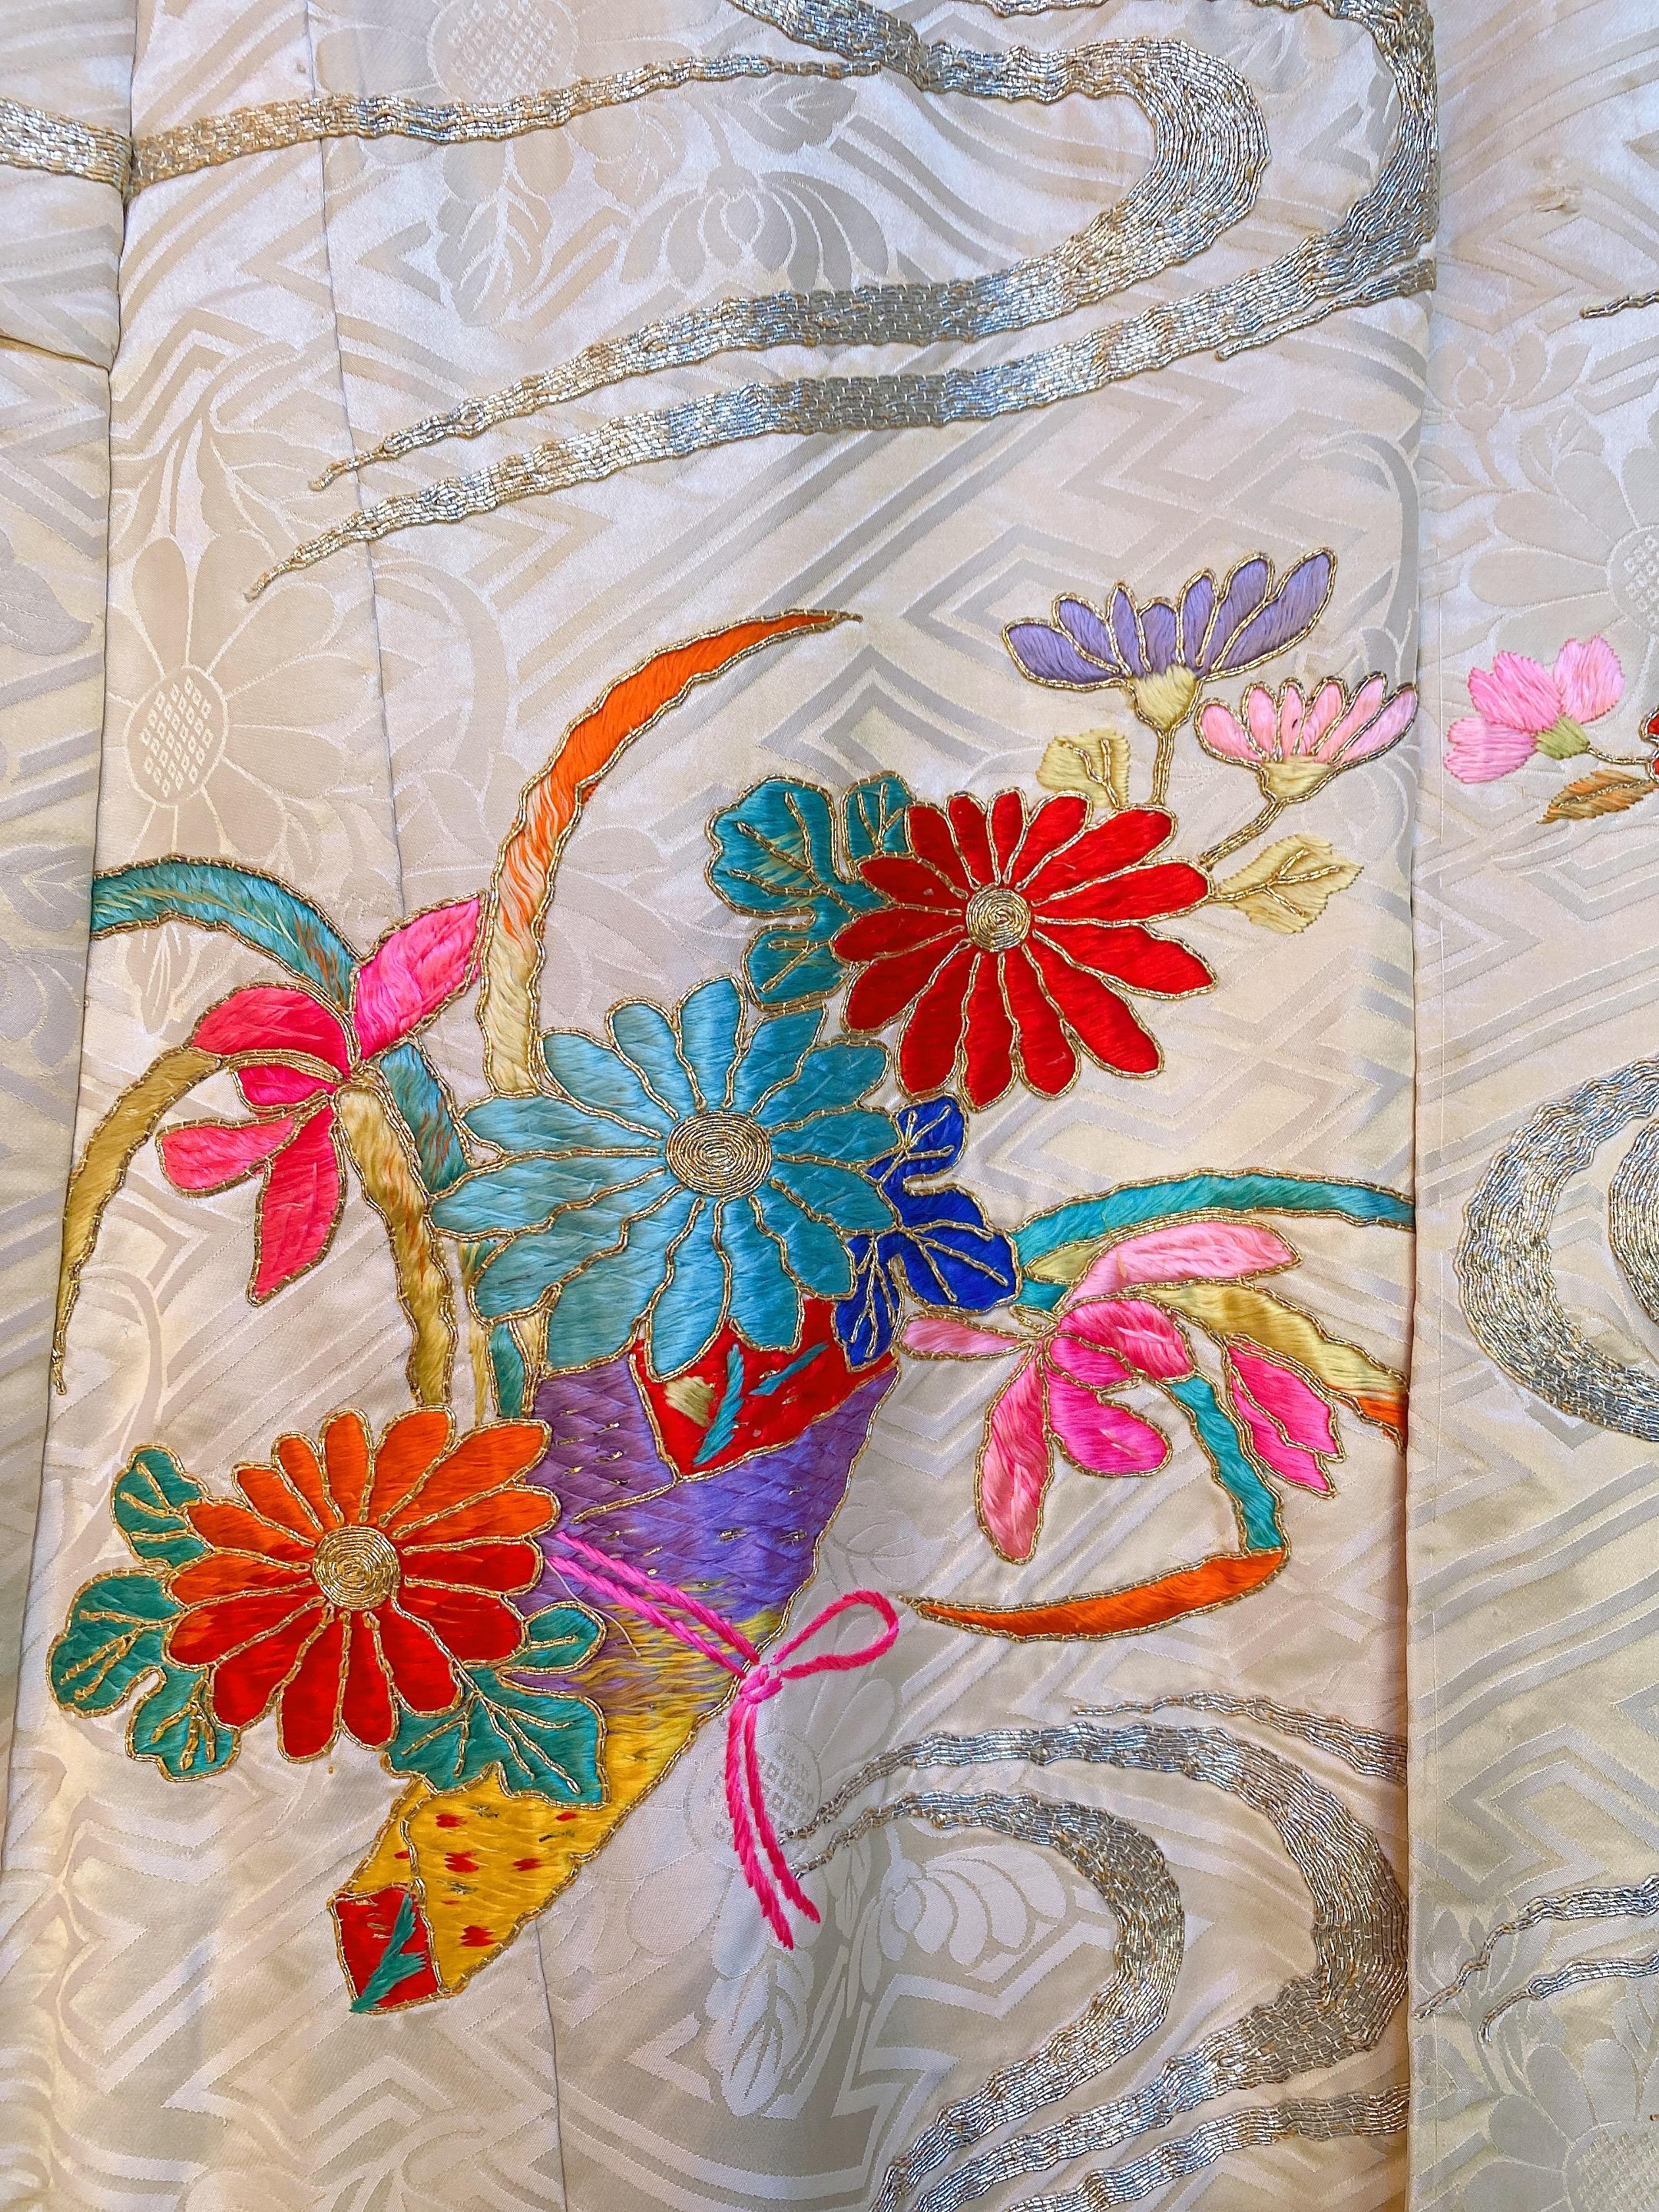 Chinese Export Rare Spectacular Hand-Embroidered Silk Japanese Kimono For Sale